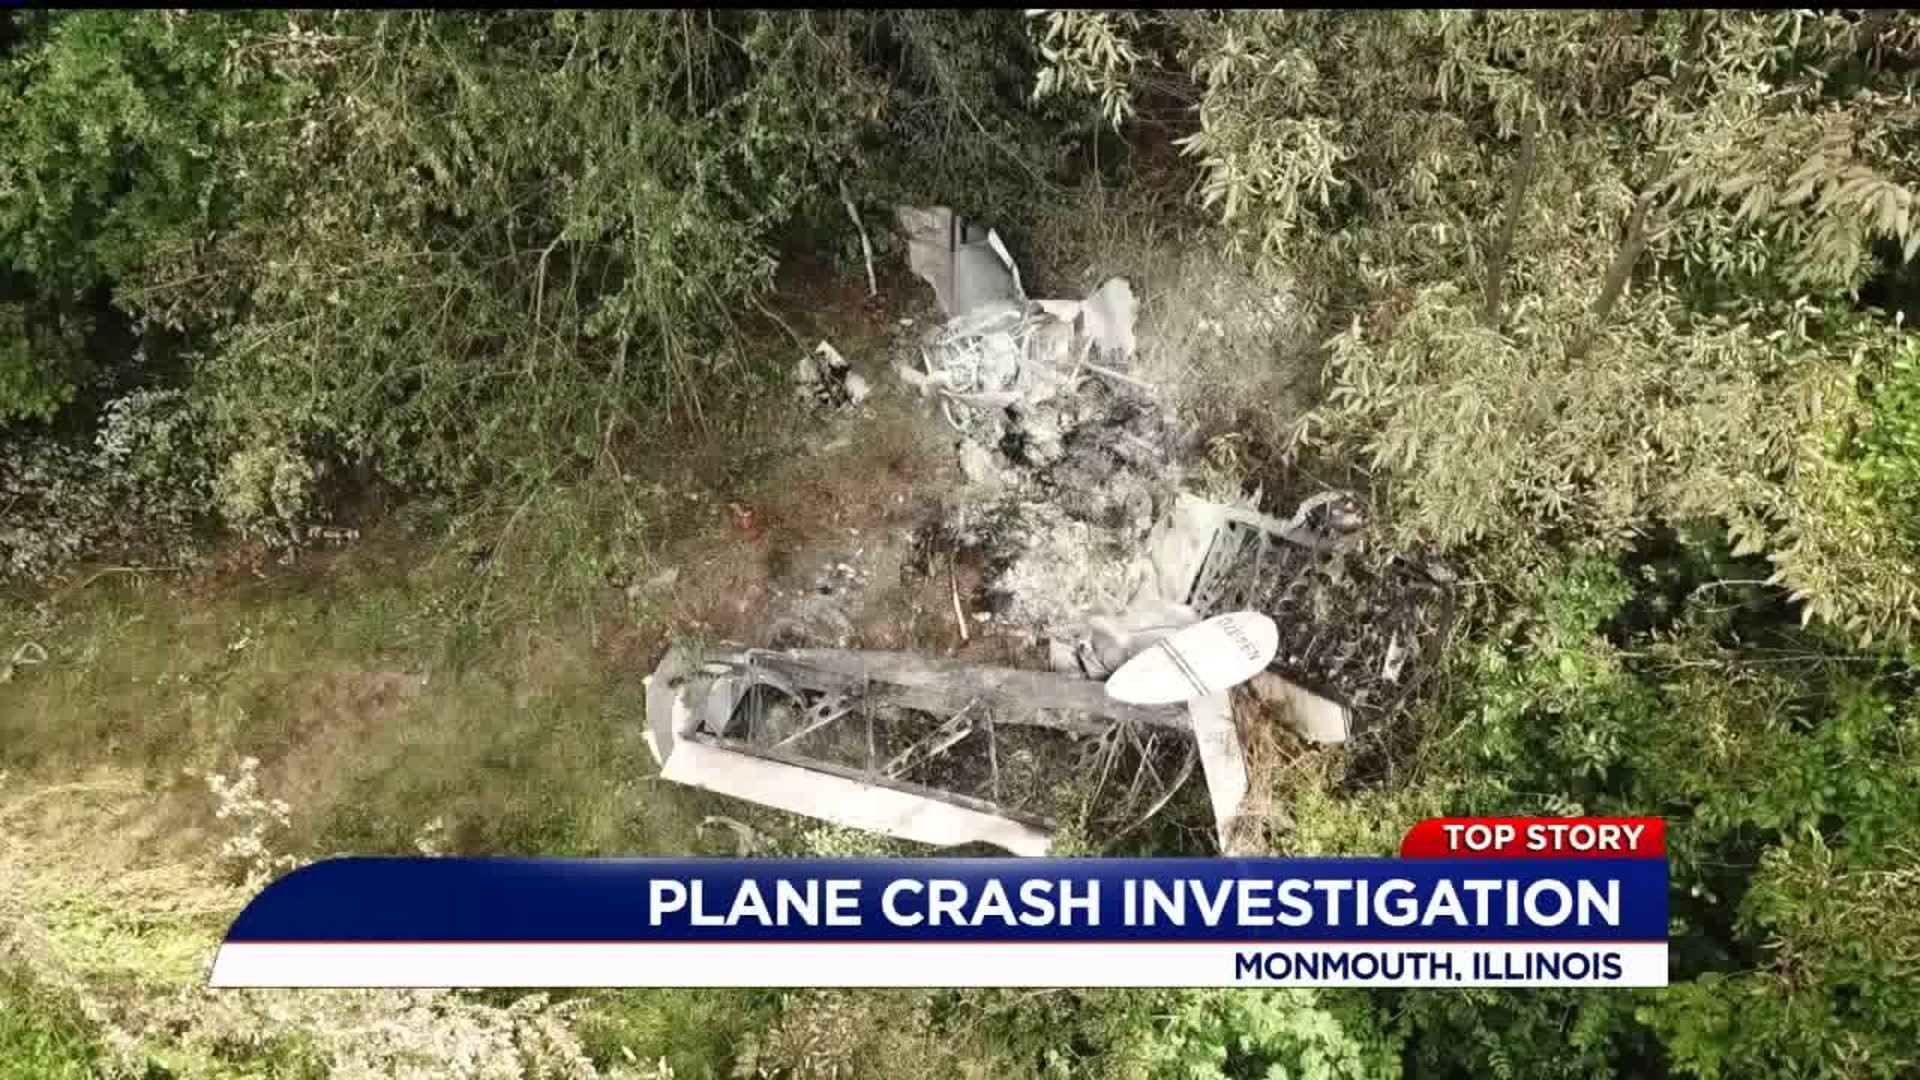 UPDATE: Two dead in plane crash in Monmouth identified | wqad.com